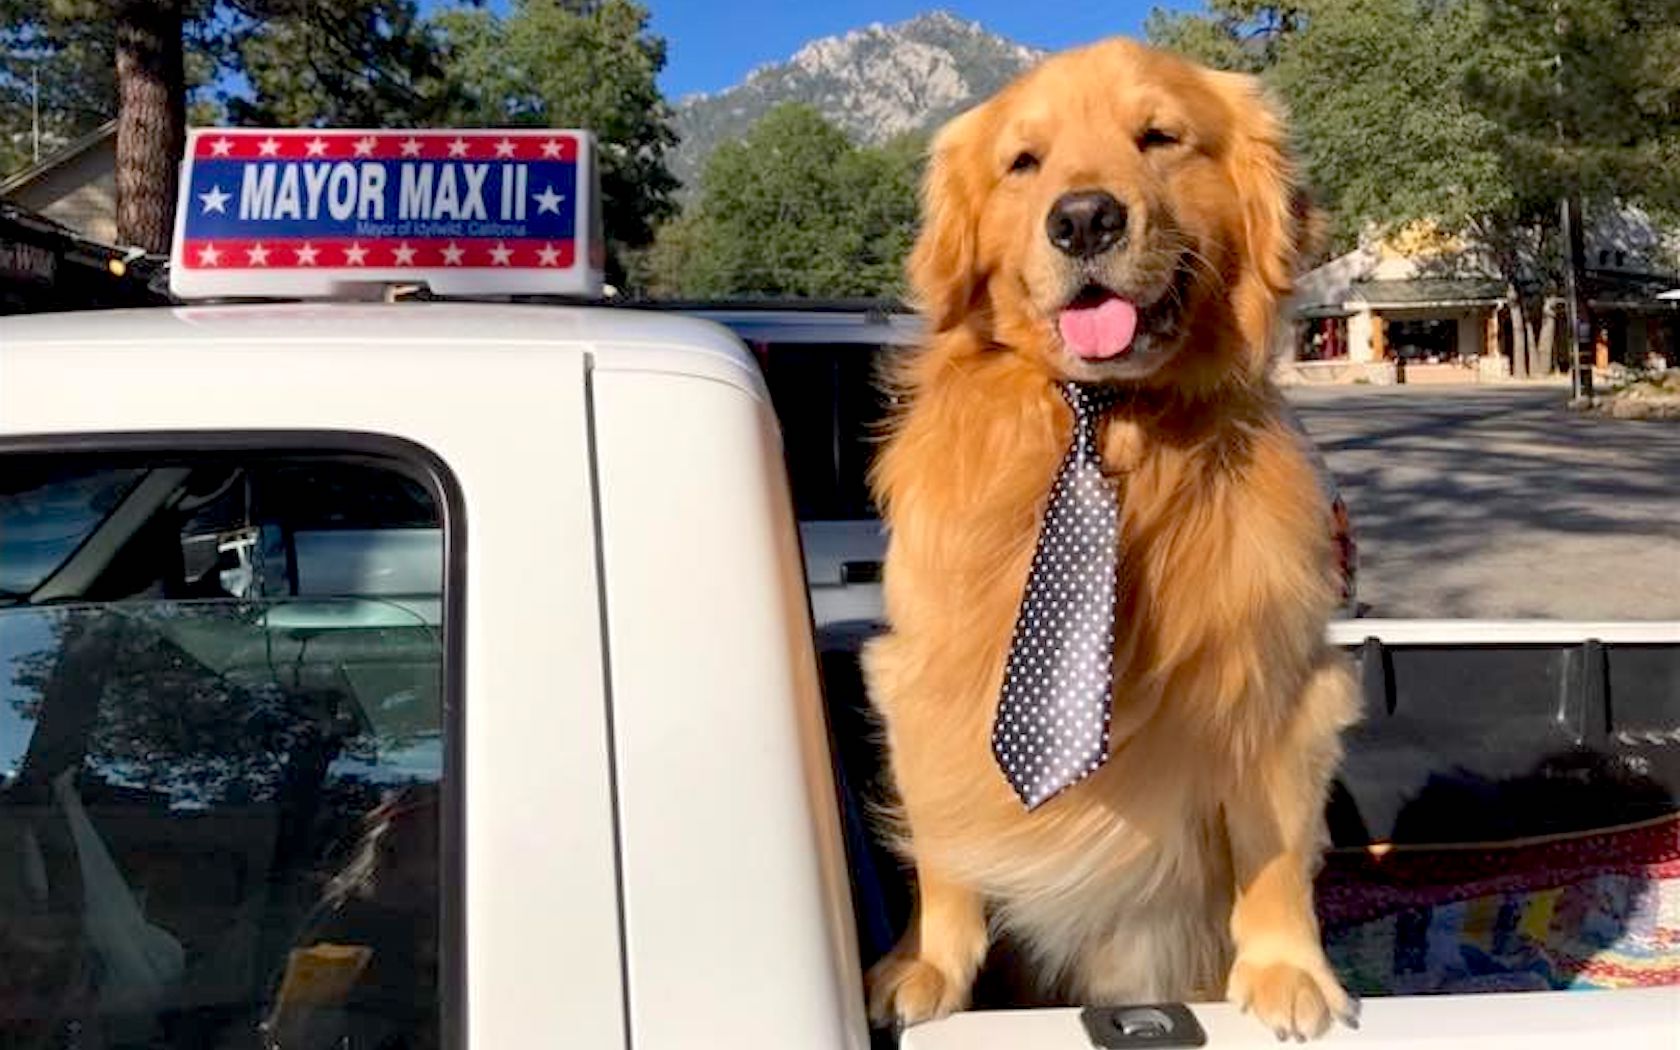 Max The Dog Has Been Elected As Mayor Of This California Town